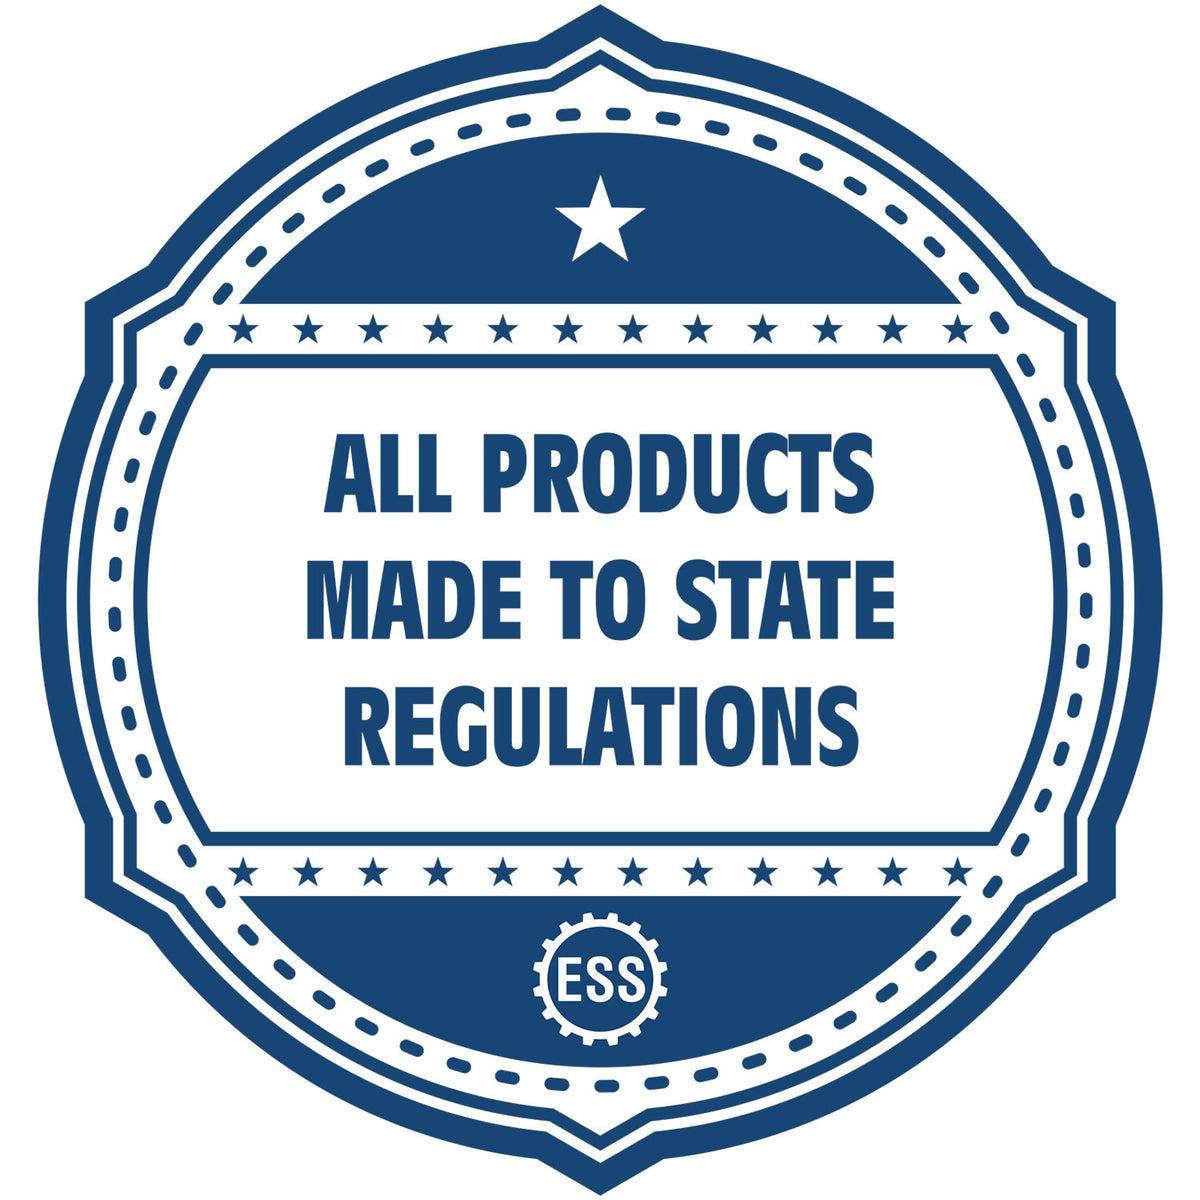 A blue icon or badge for the Hybrid New Hampshire Landscape Architect Seal showing that this product is made in compliance with state regulations.